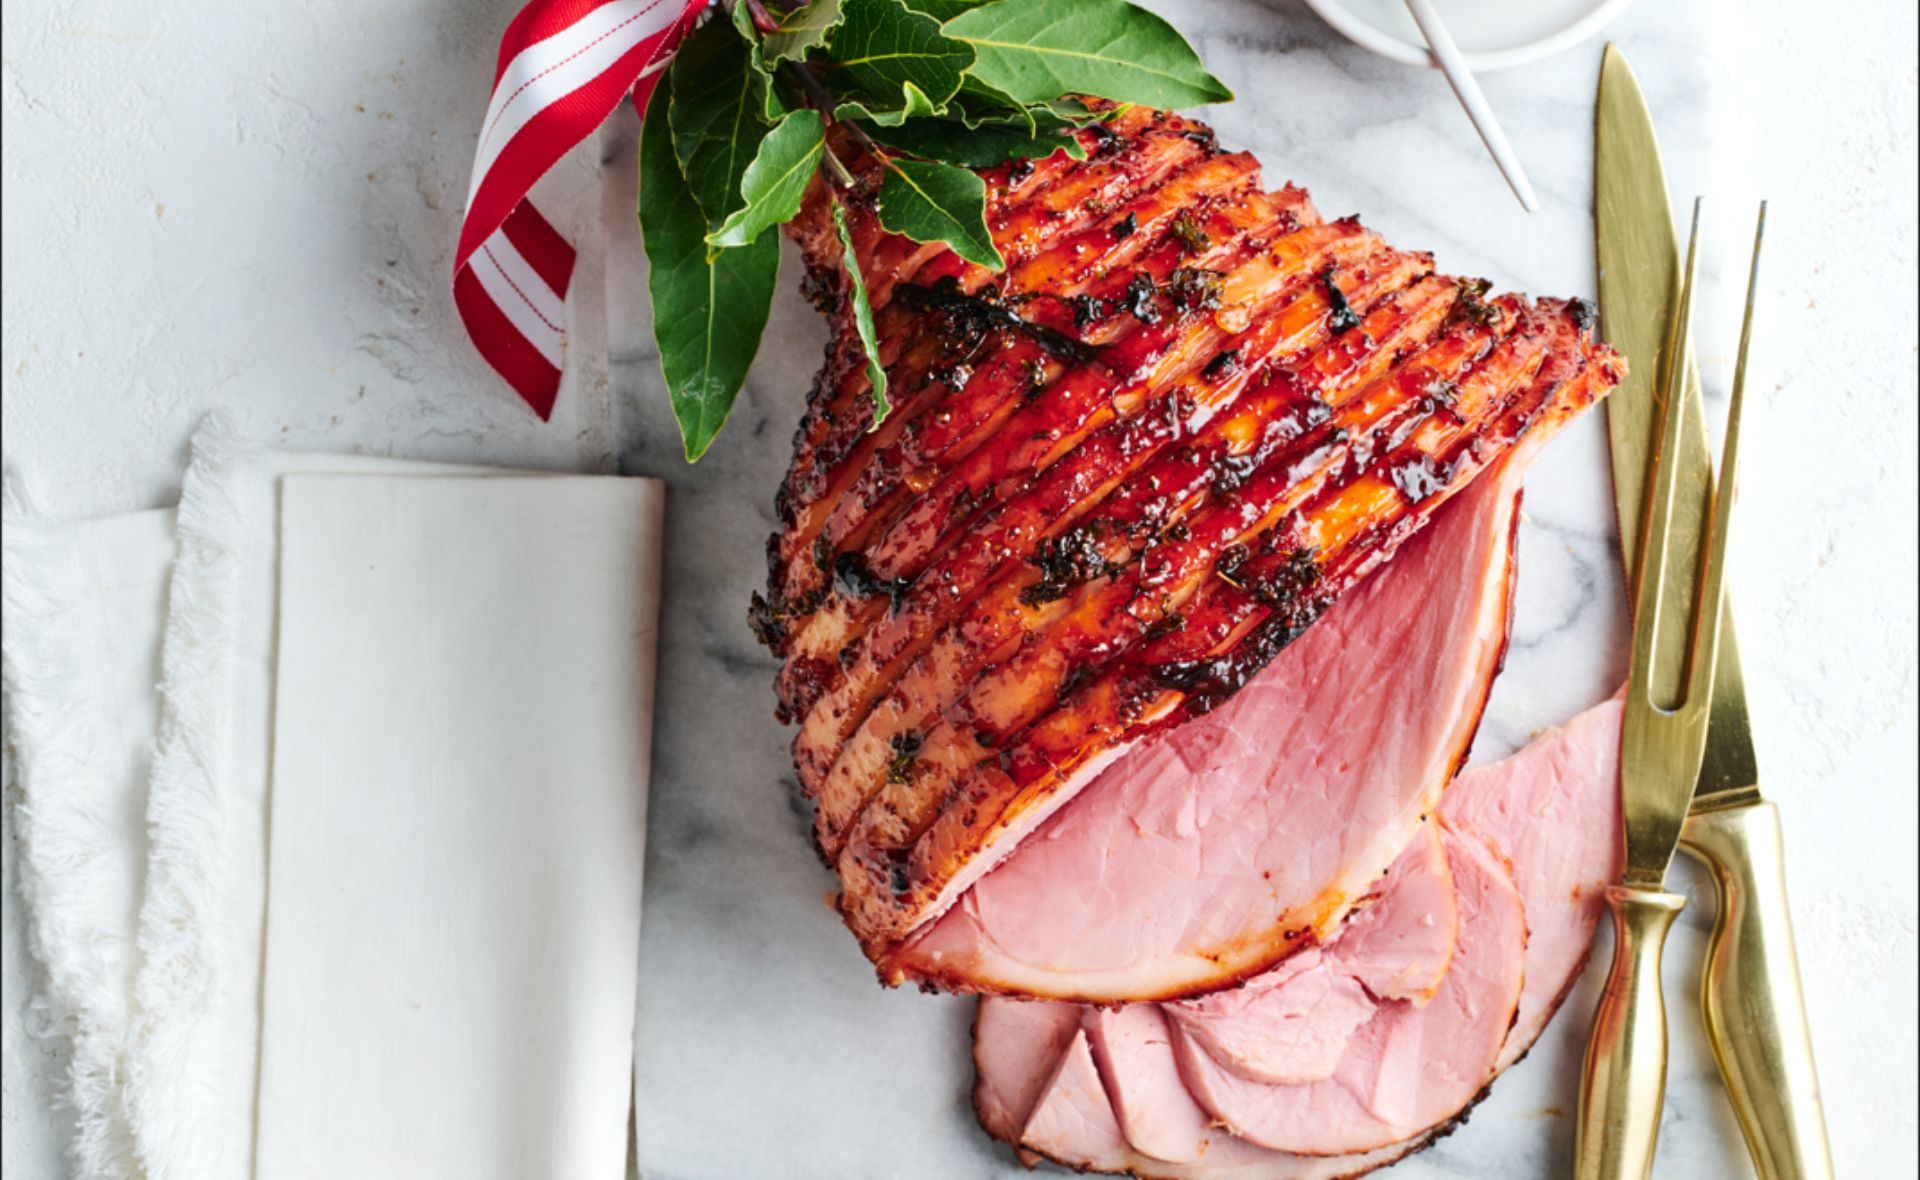 Head outdoors this Christmas with this ham you can cook on the barbie!